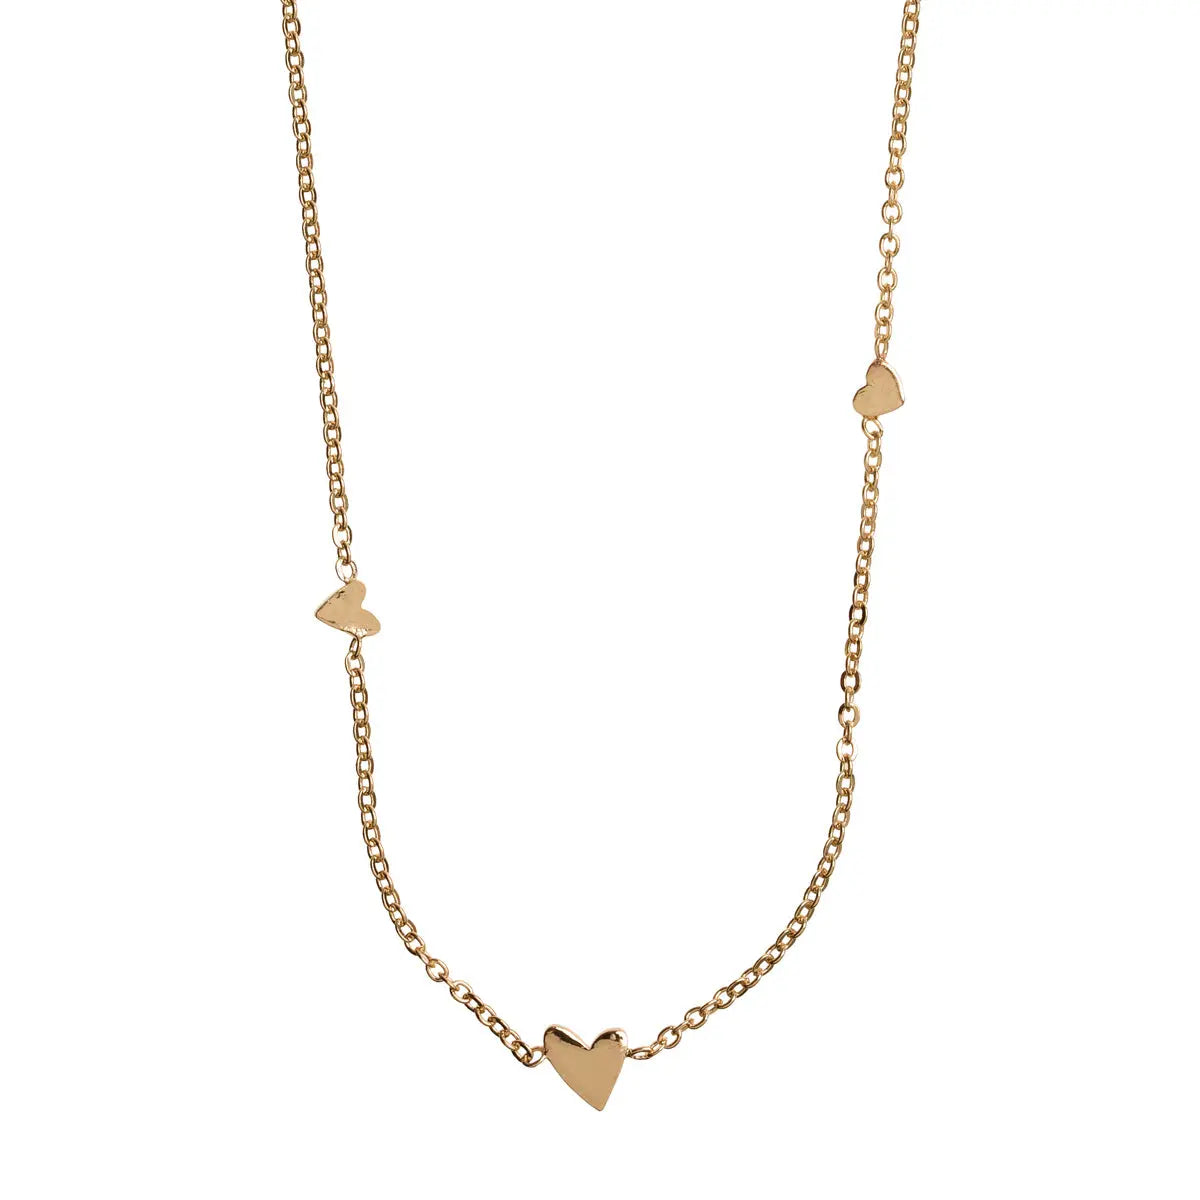 3 small hearts necklace Gold